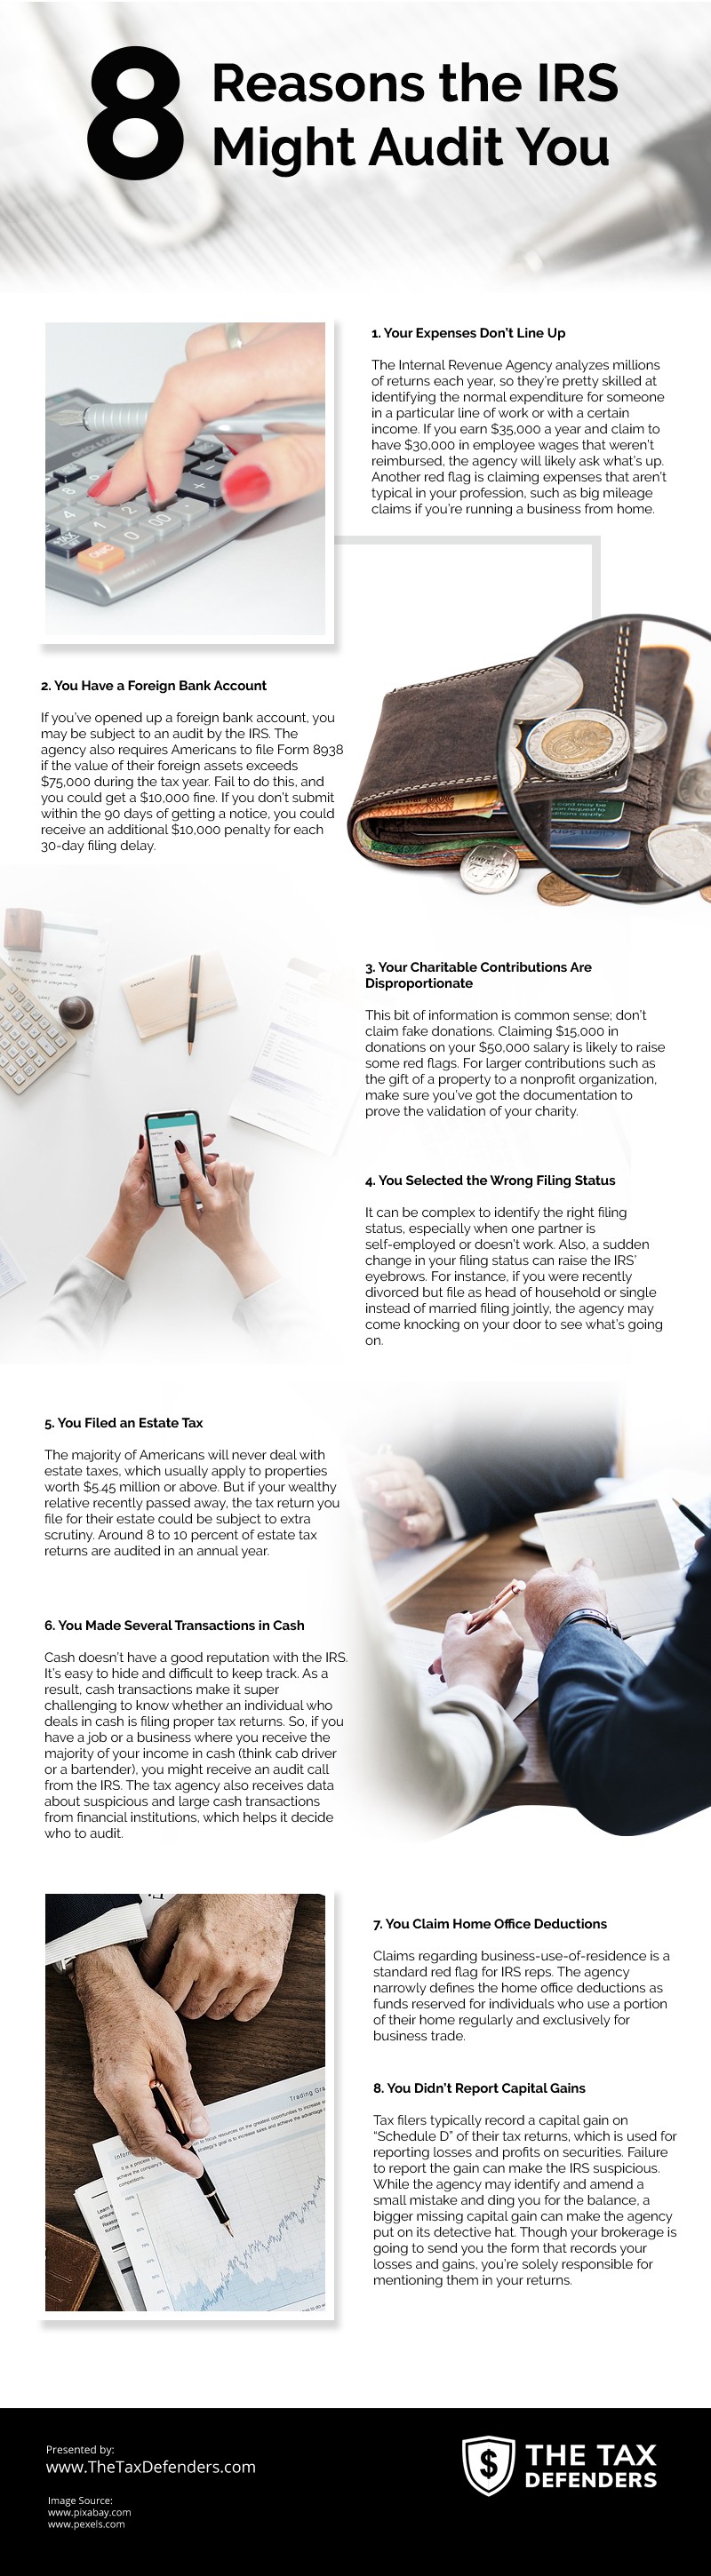 8 Reasons the IRS Might Audit You Infographic